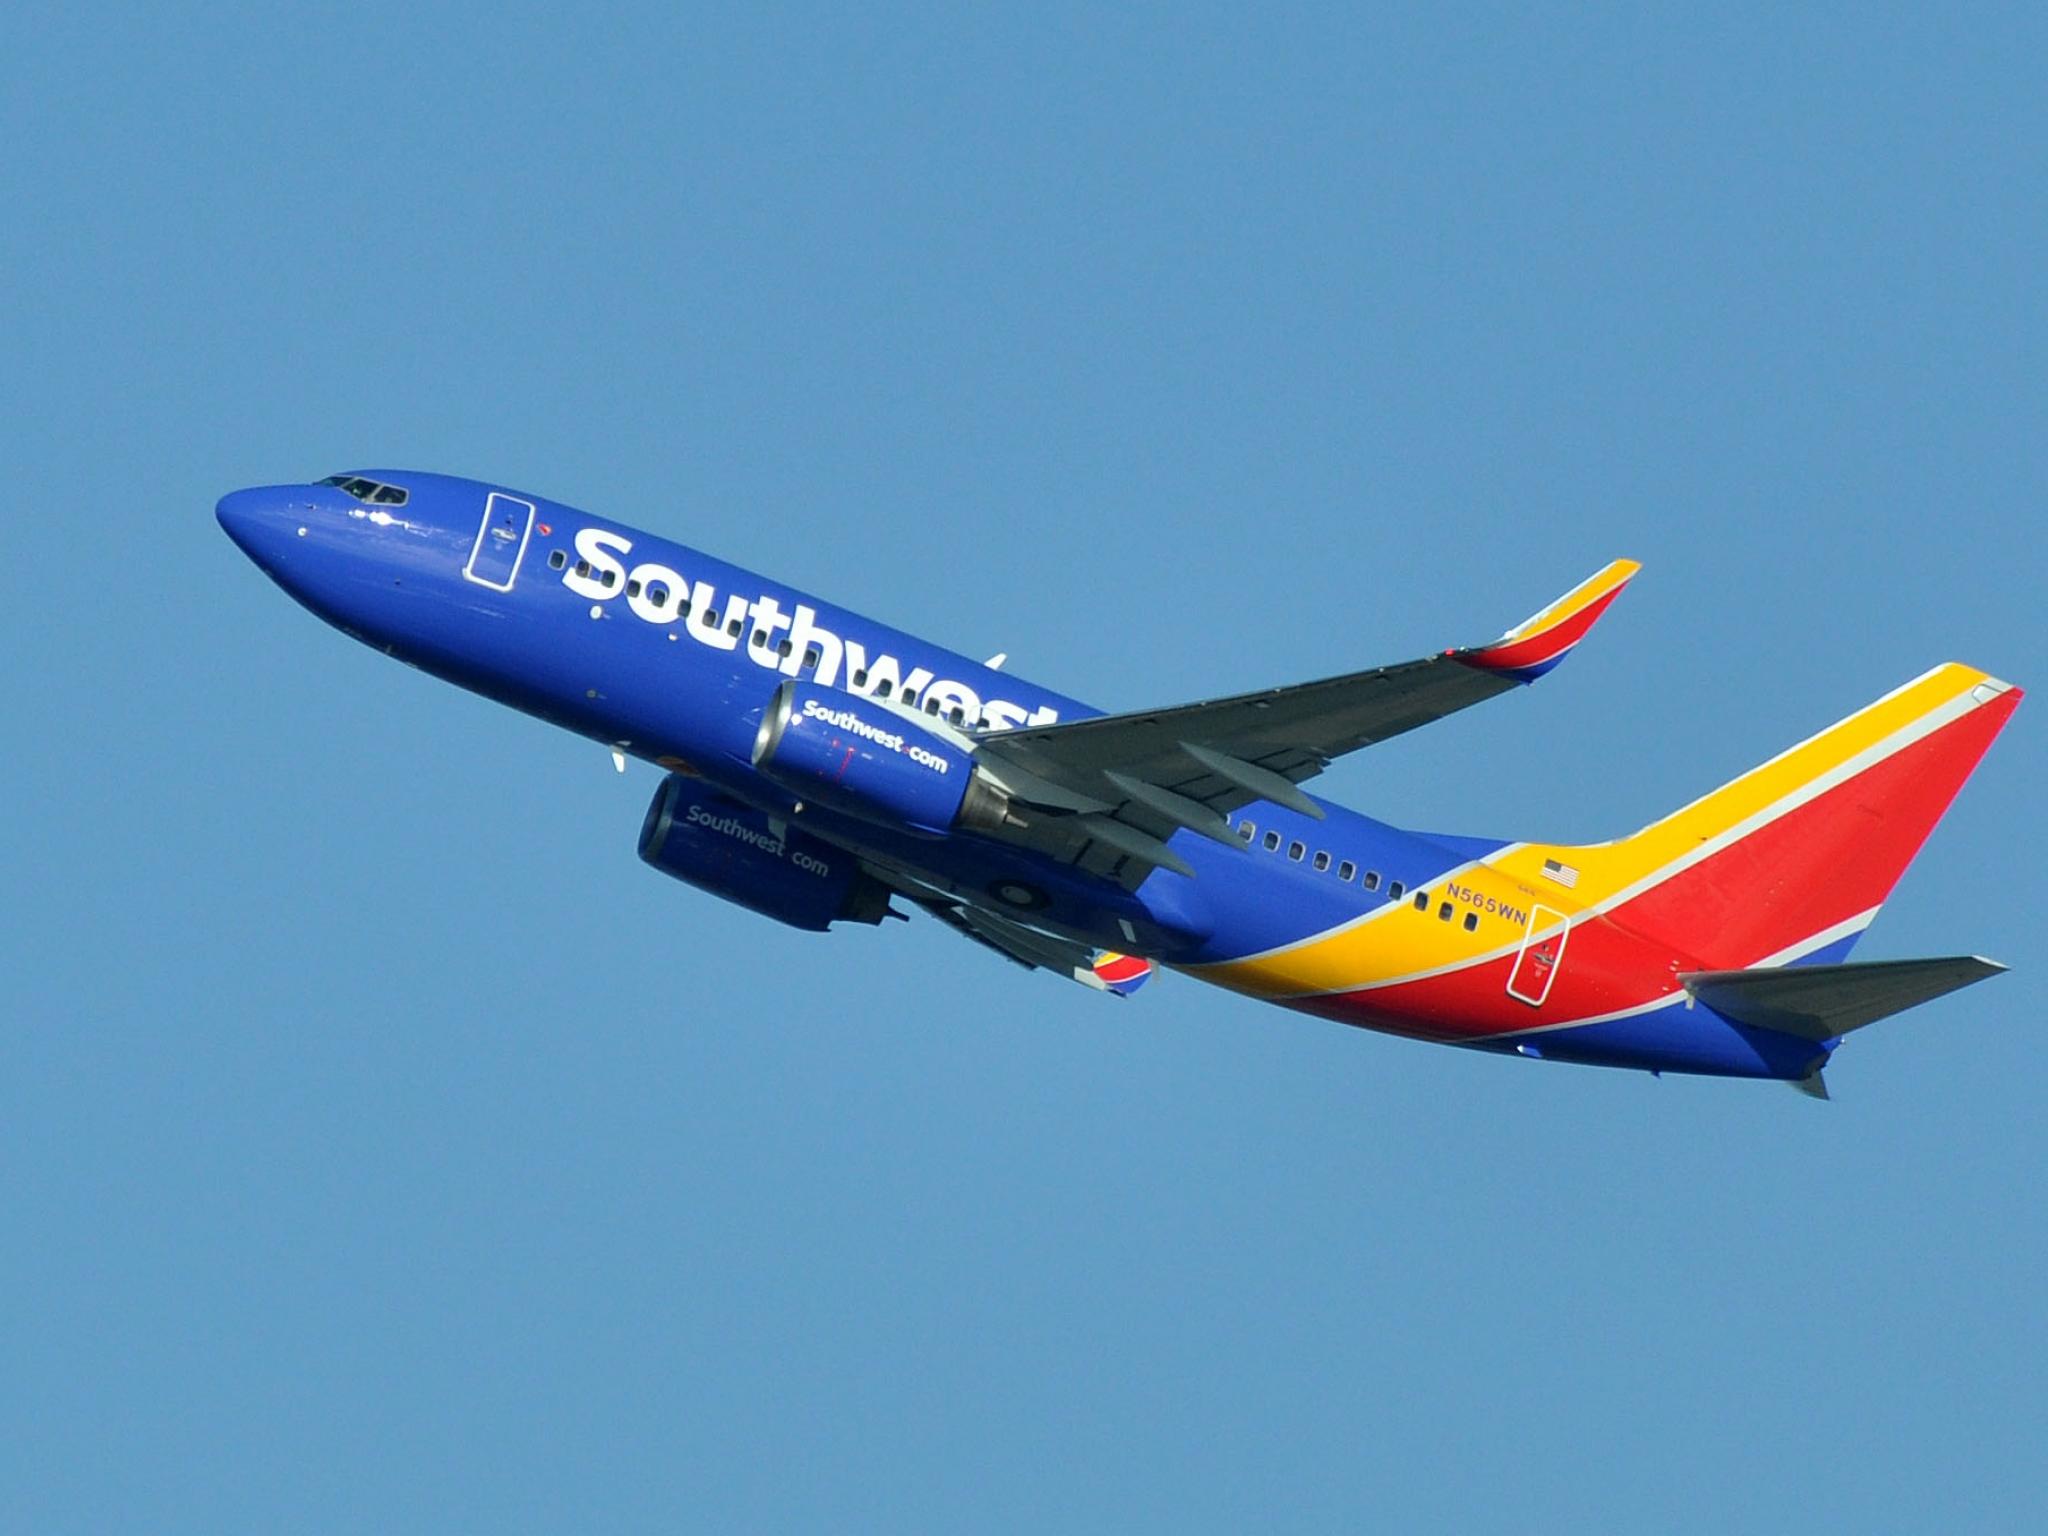  penalty-warranted-for-southwest-airlines-flight-fiasco-amazon-leverages-generative-ai-for-holiday-ad-boost-mcdonalds-q3-earnings-todays-top-stories 